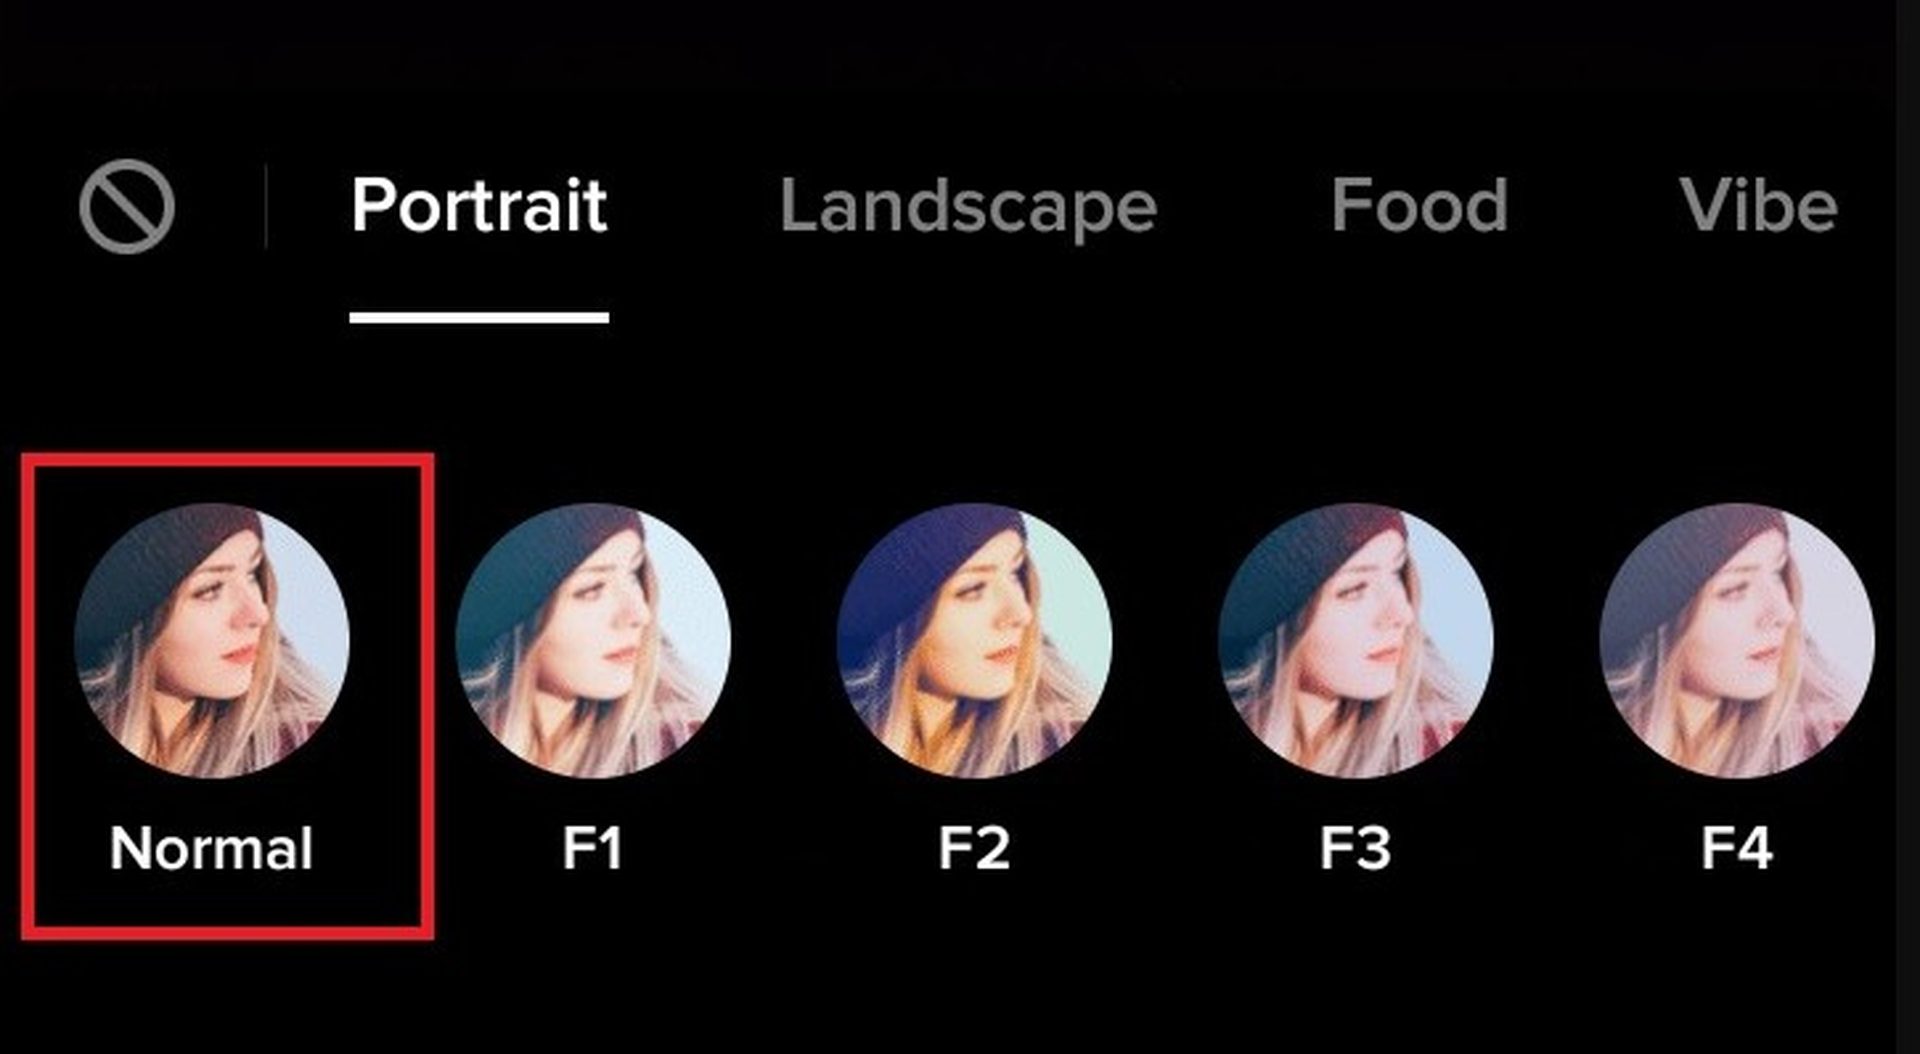 How to add or remove rotoscope filter on TikTok?